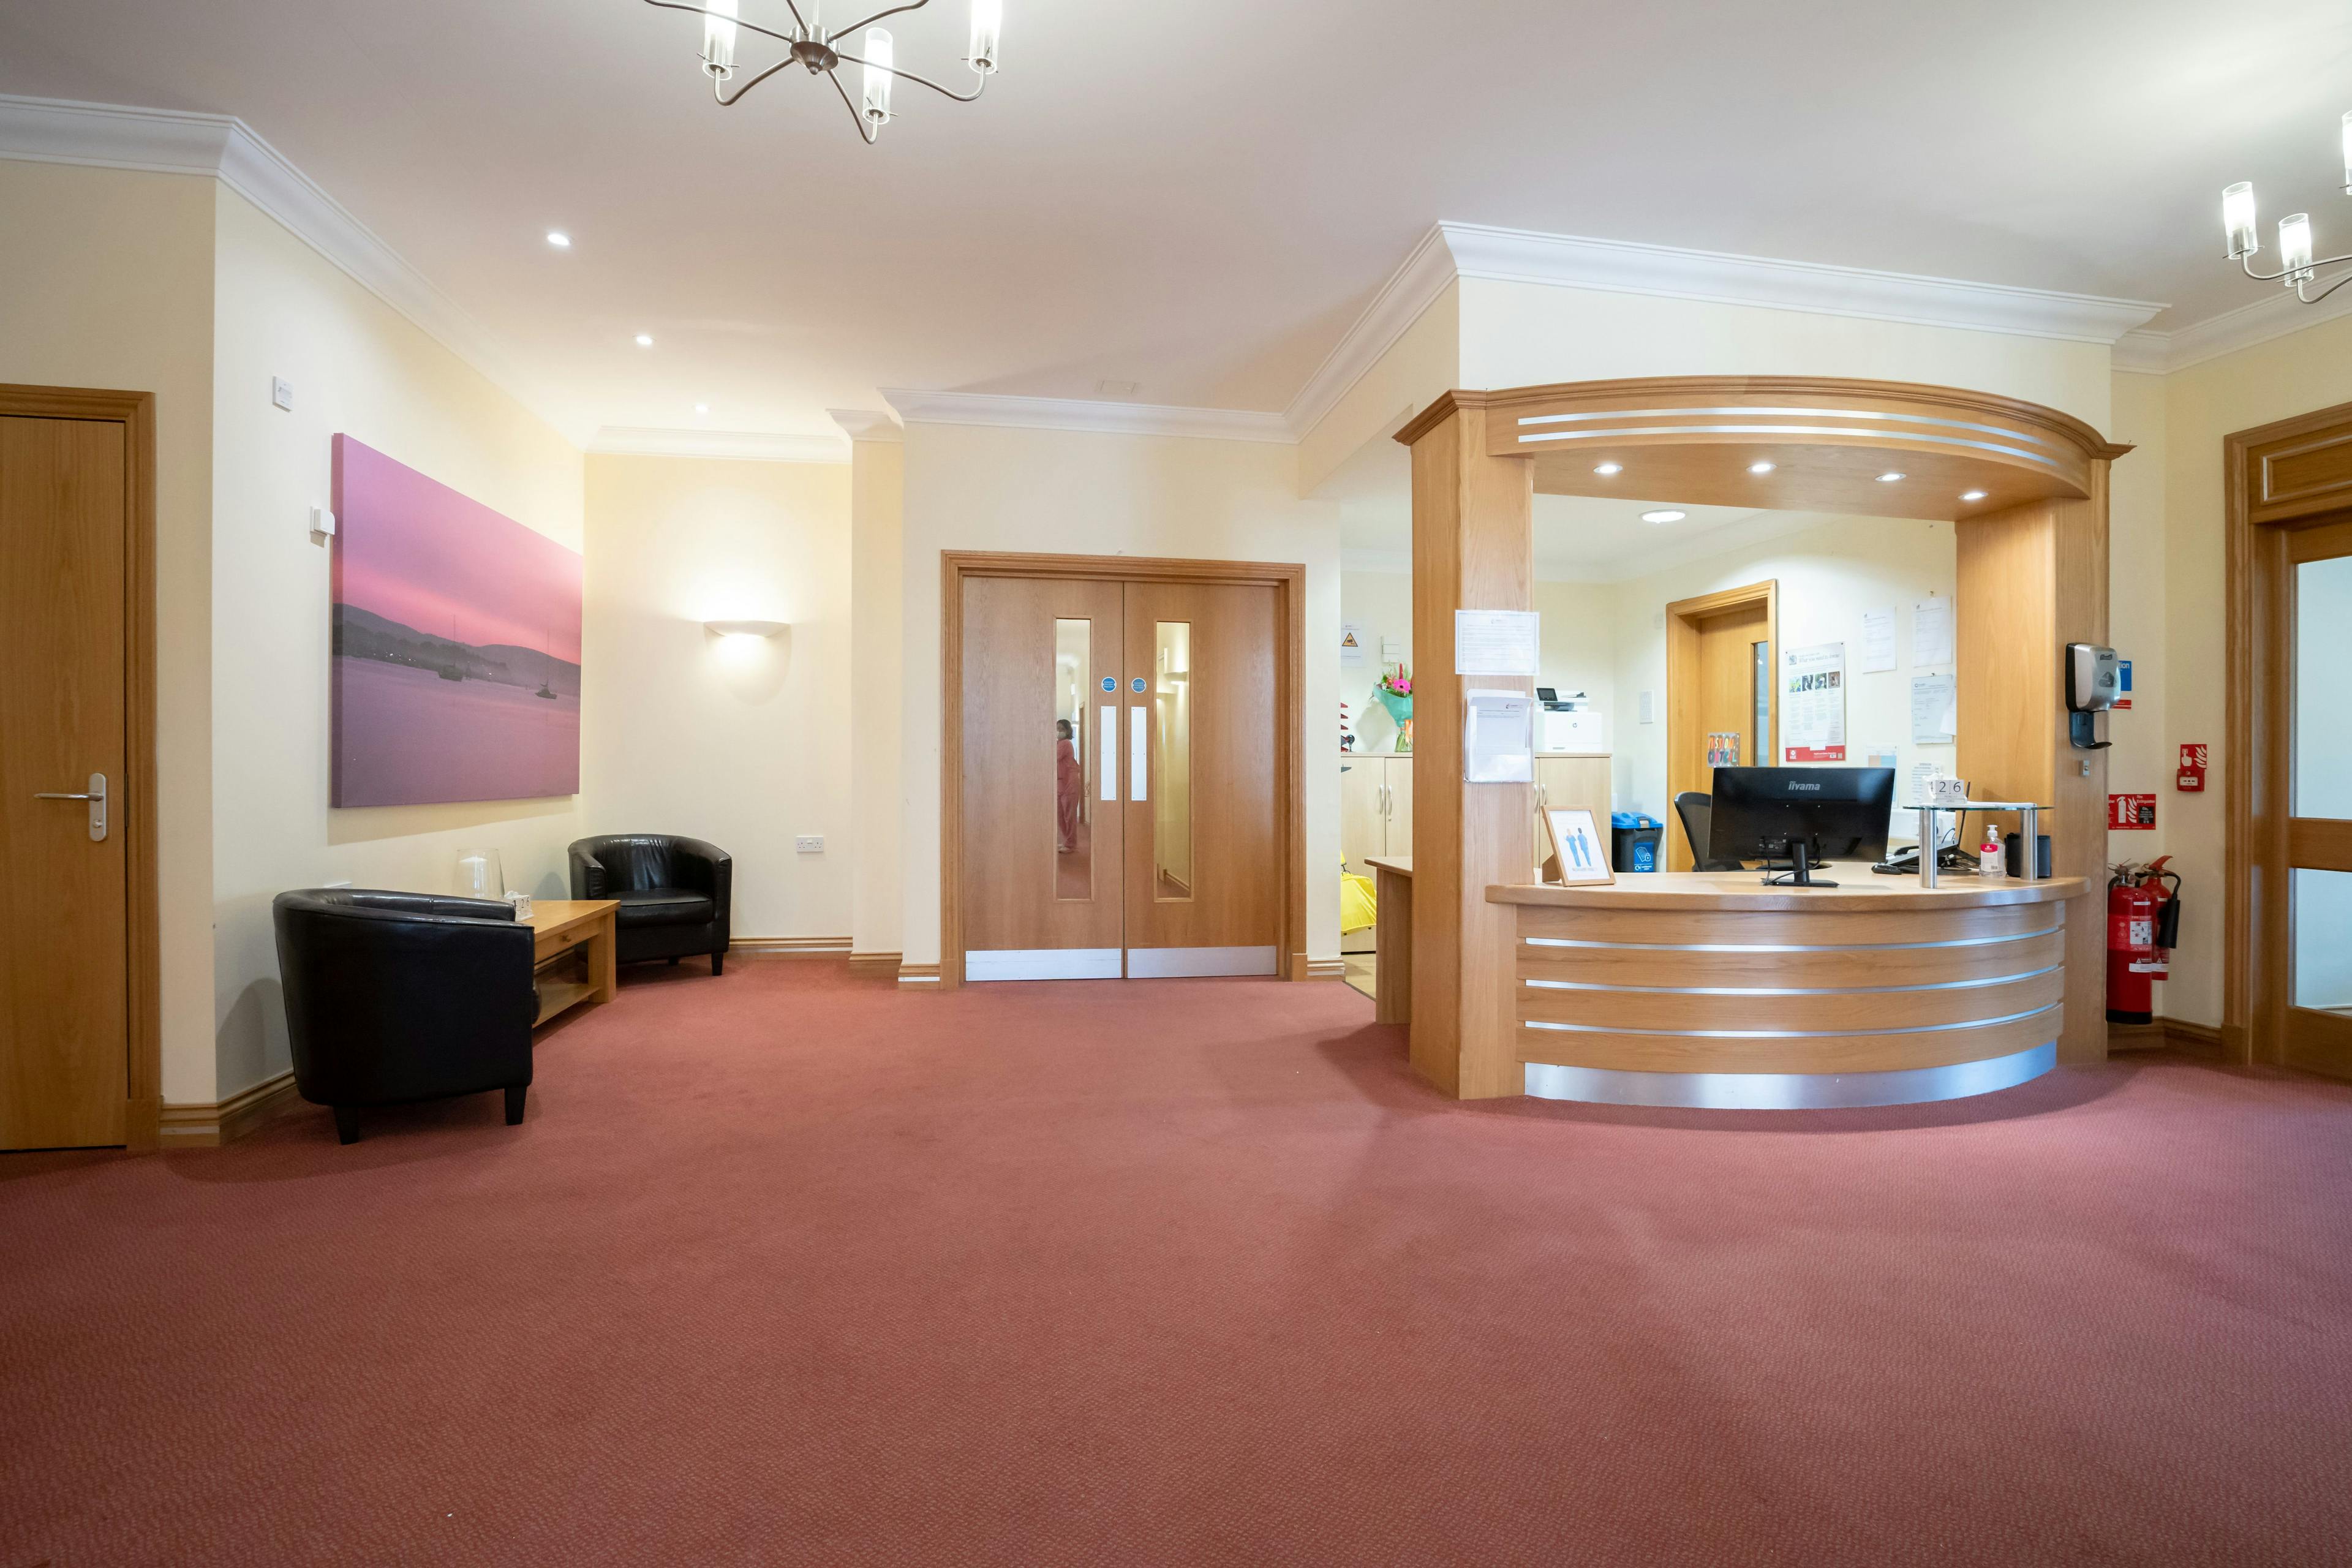 Reception of Branksome Park care home in Poole, Dorset